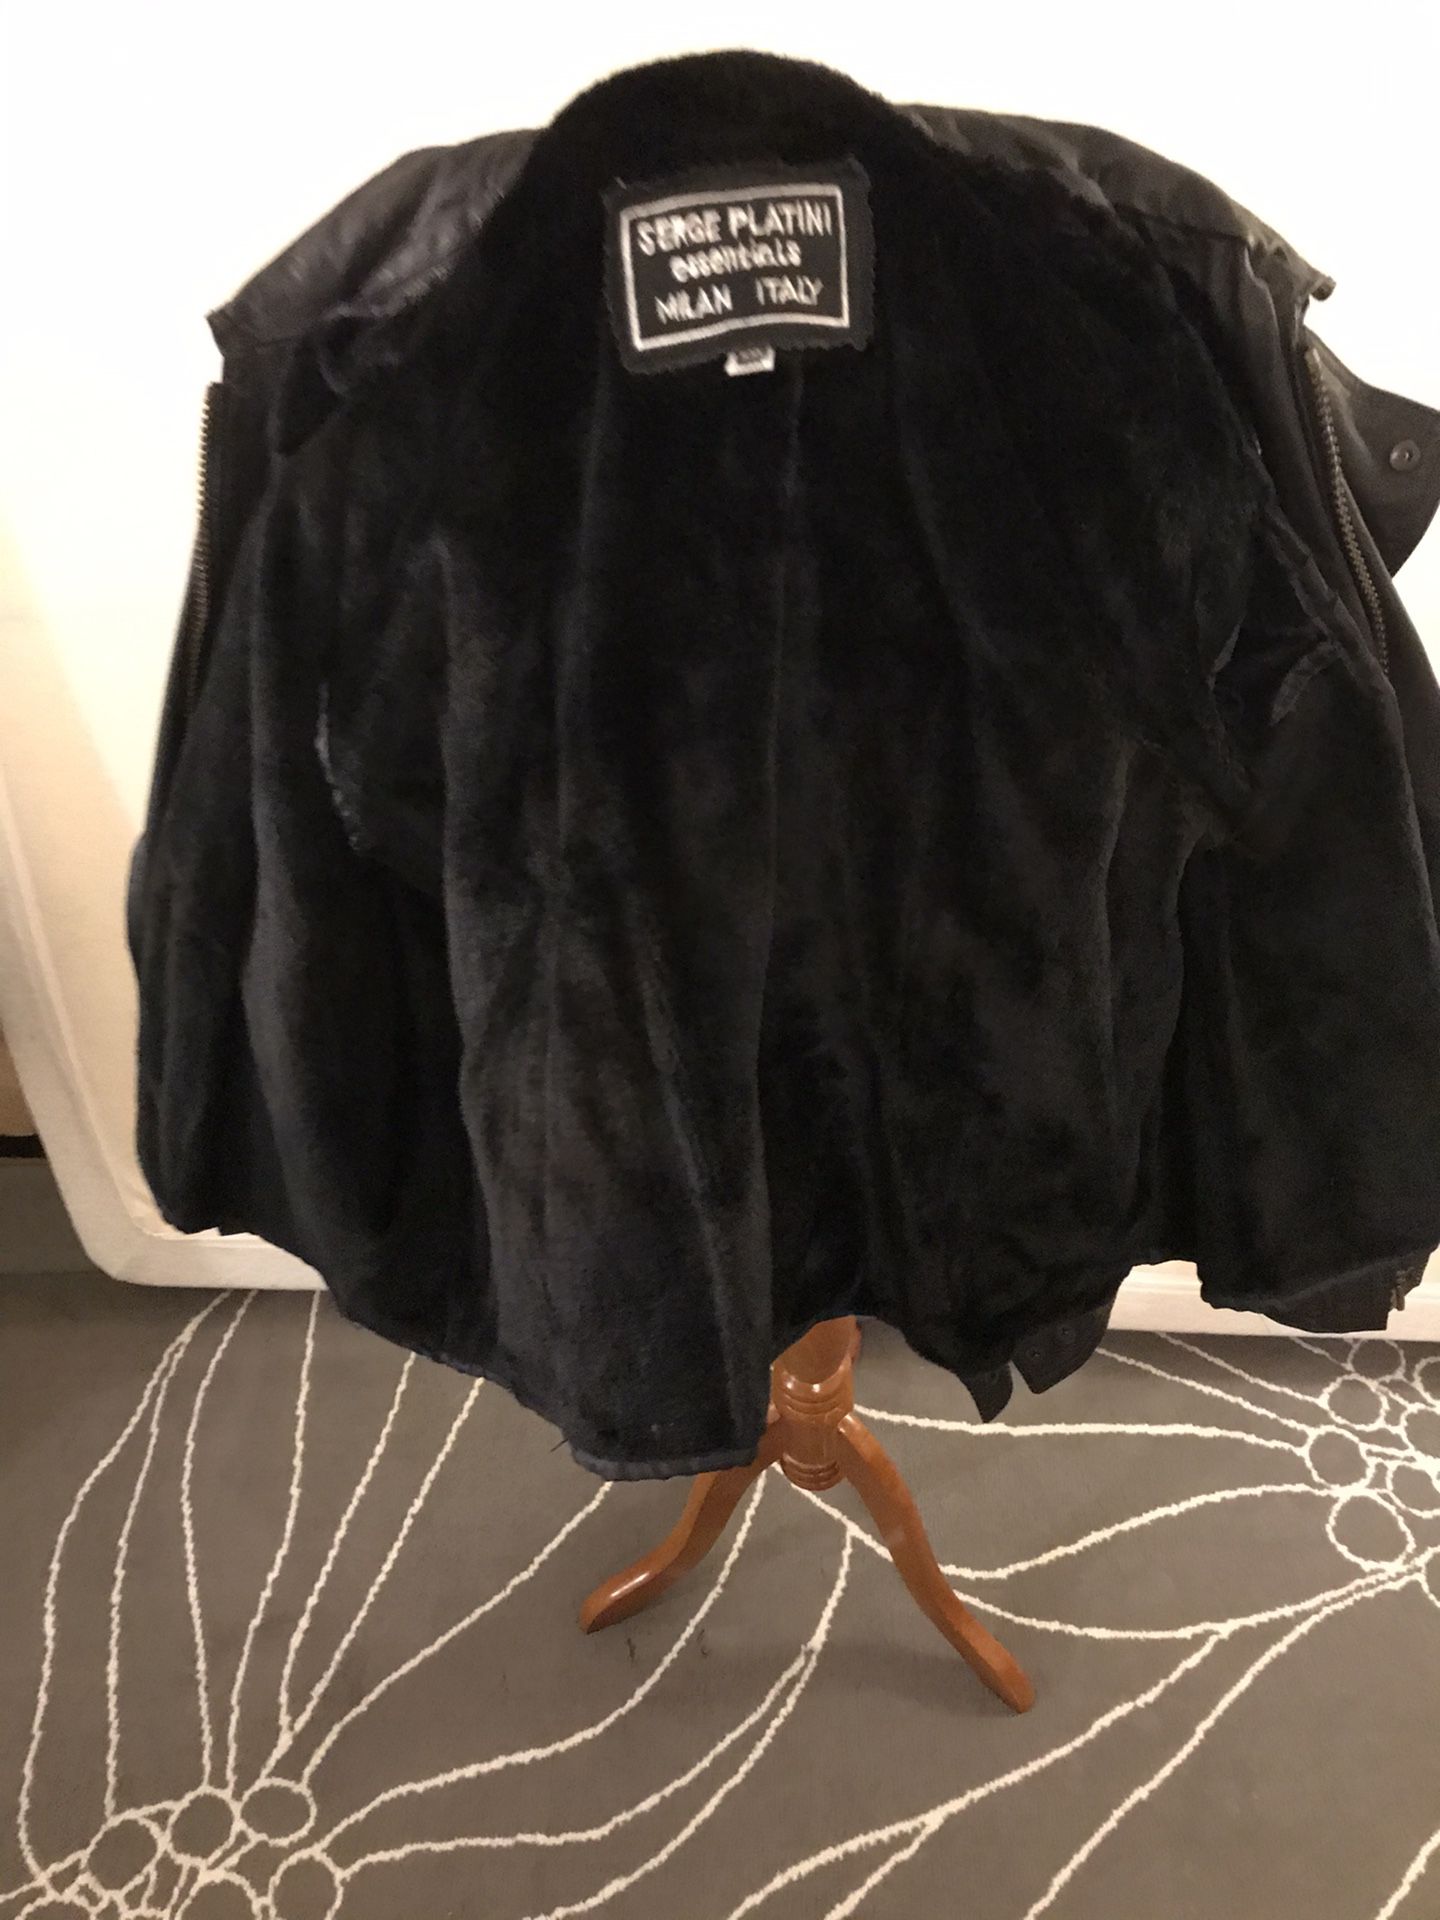 Serge Platini Leather Jacket Milan Italy size Med. for Sale in Chicago ...